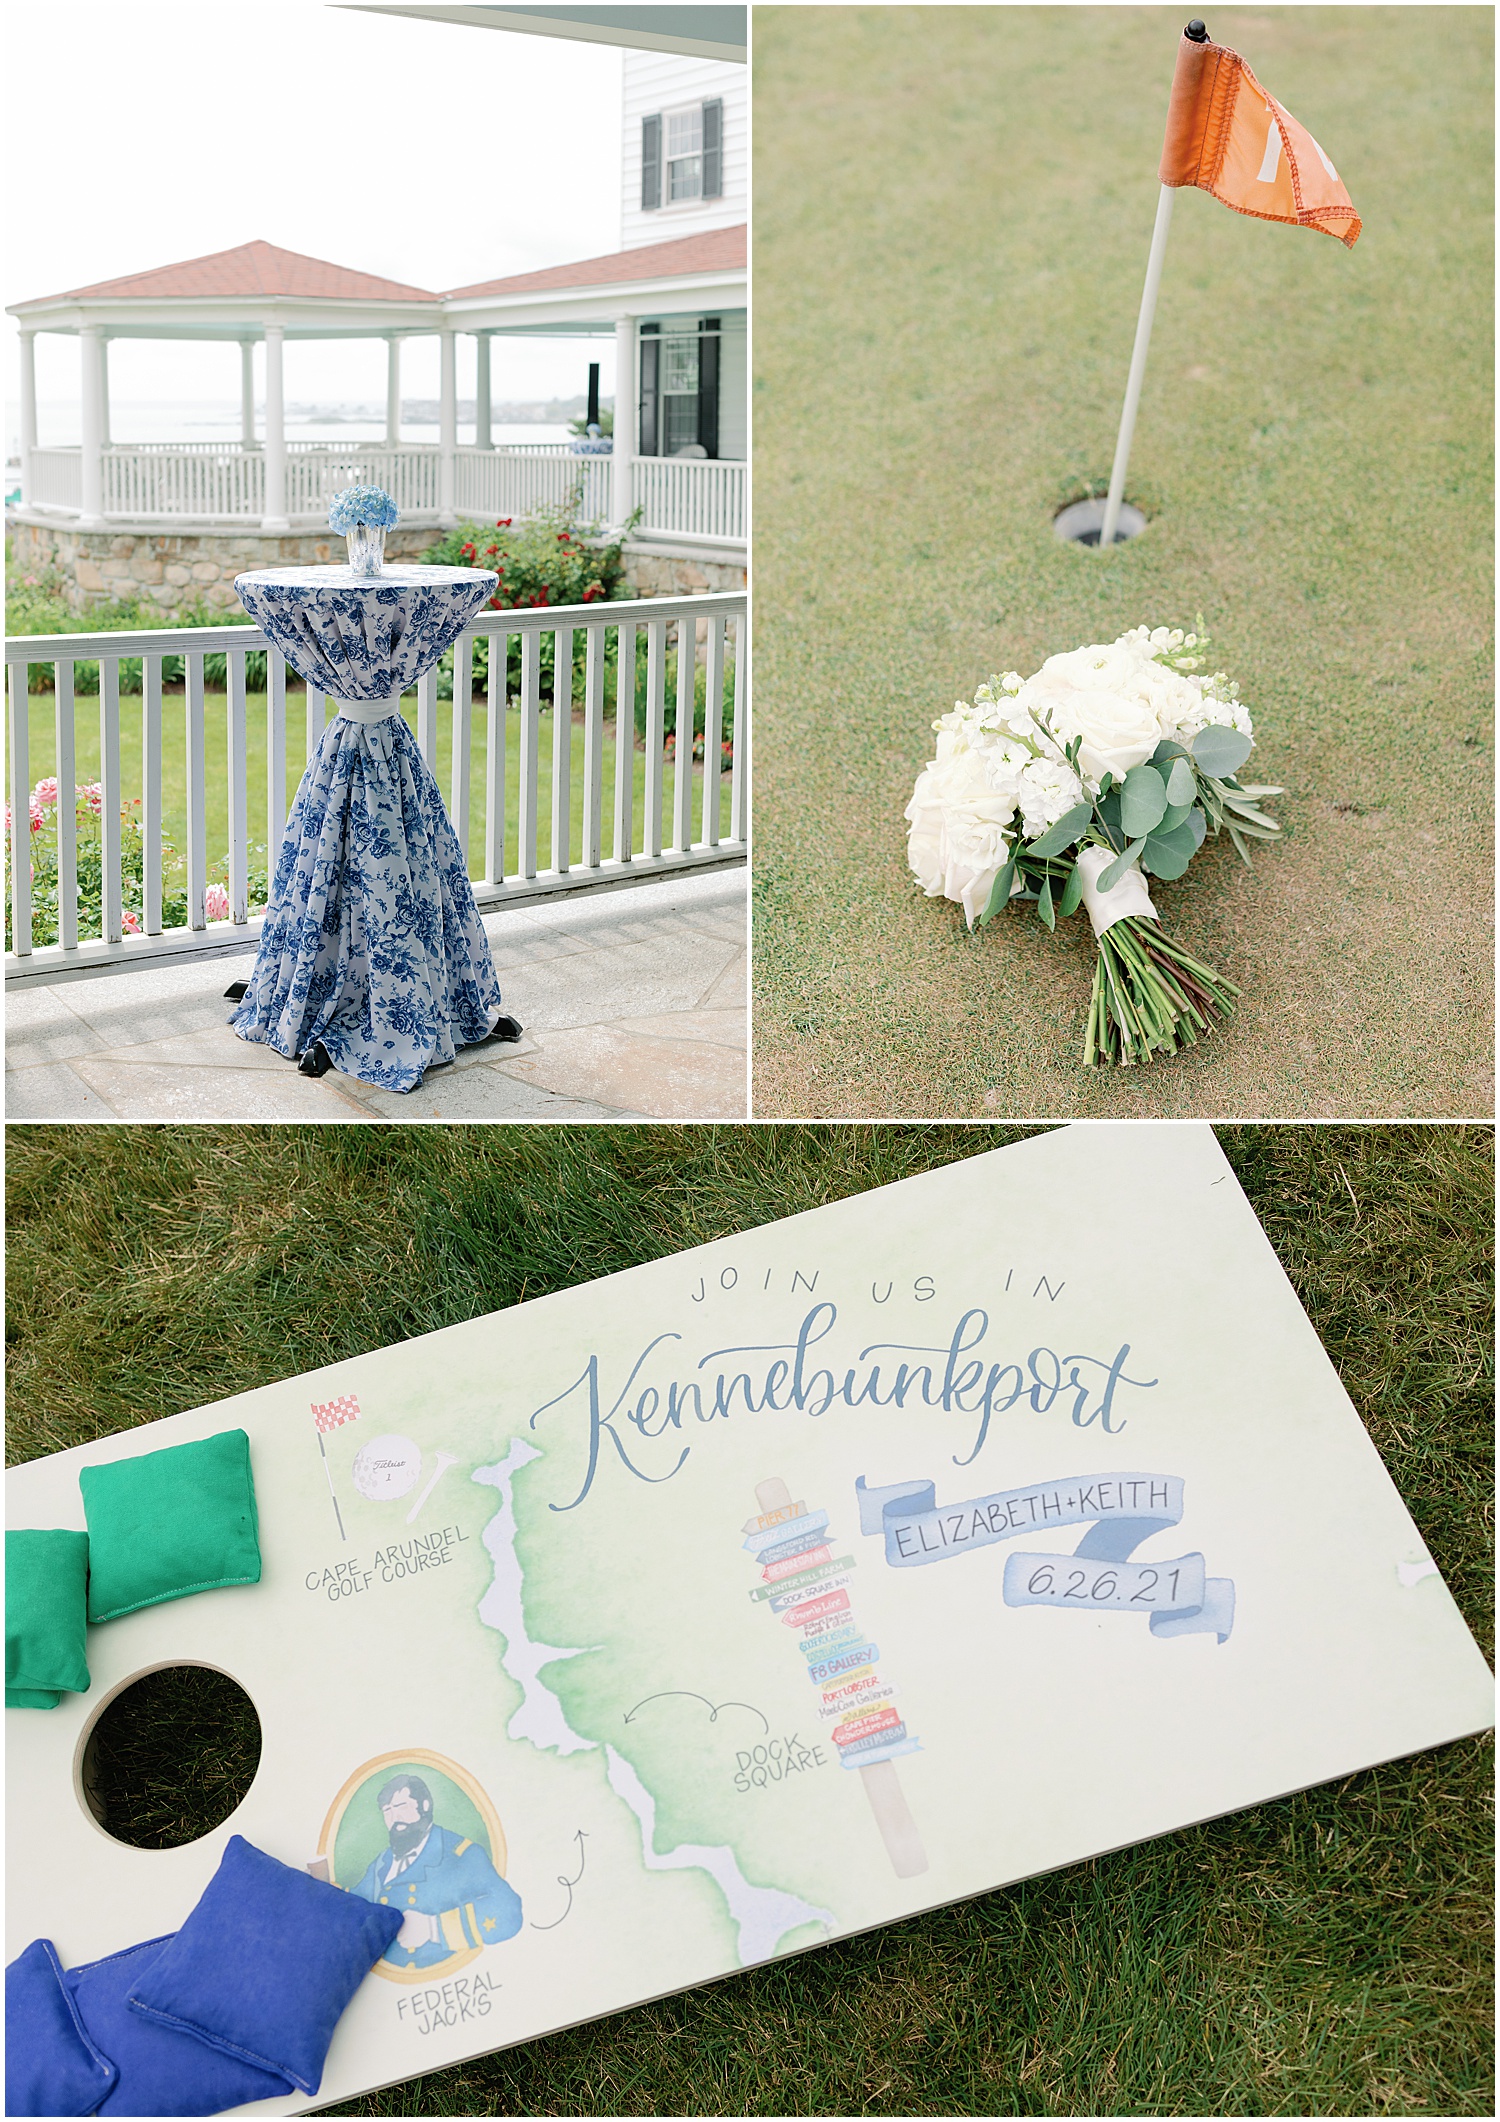 cocktail hour at kennebunkport maine wedding with custom corn hole boards by mulberry & elm